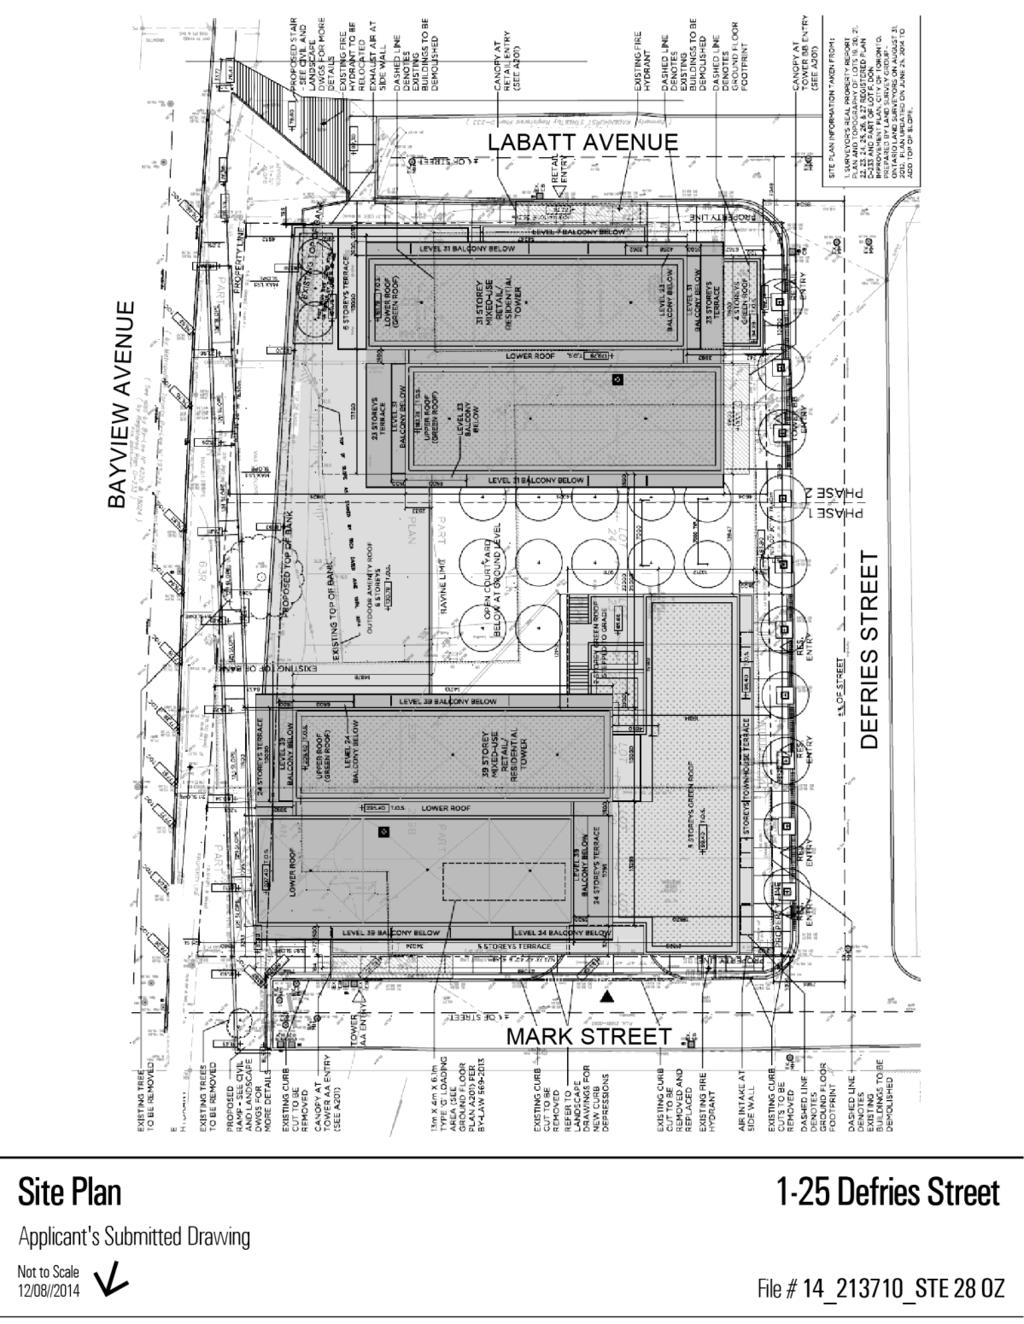 Attachment 1: Site Plan Staff Report for